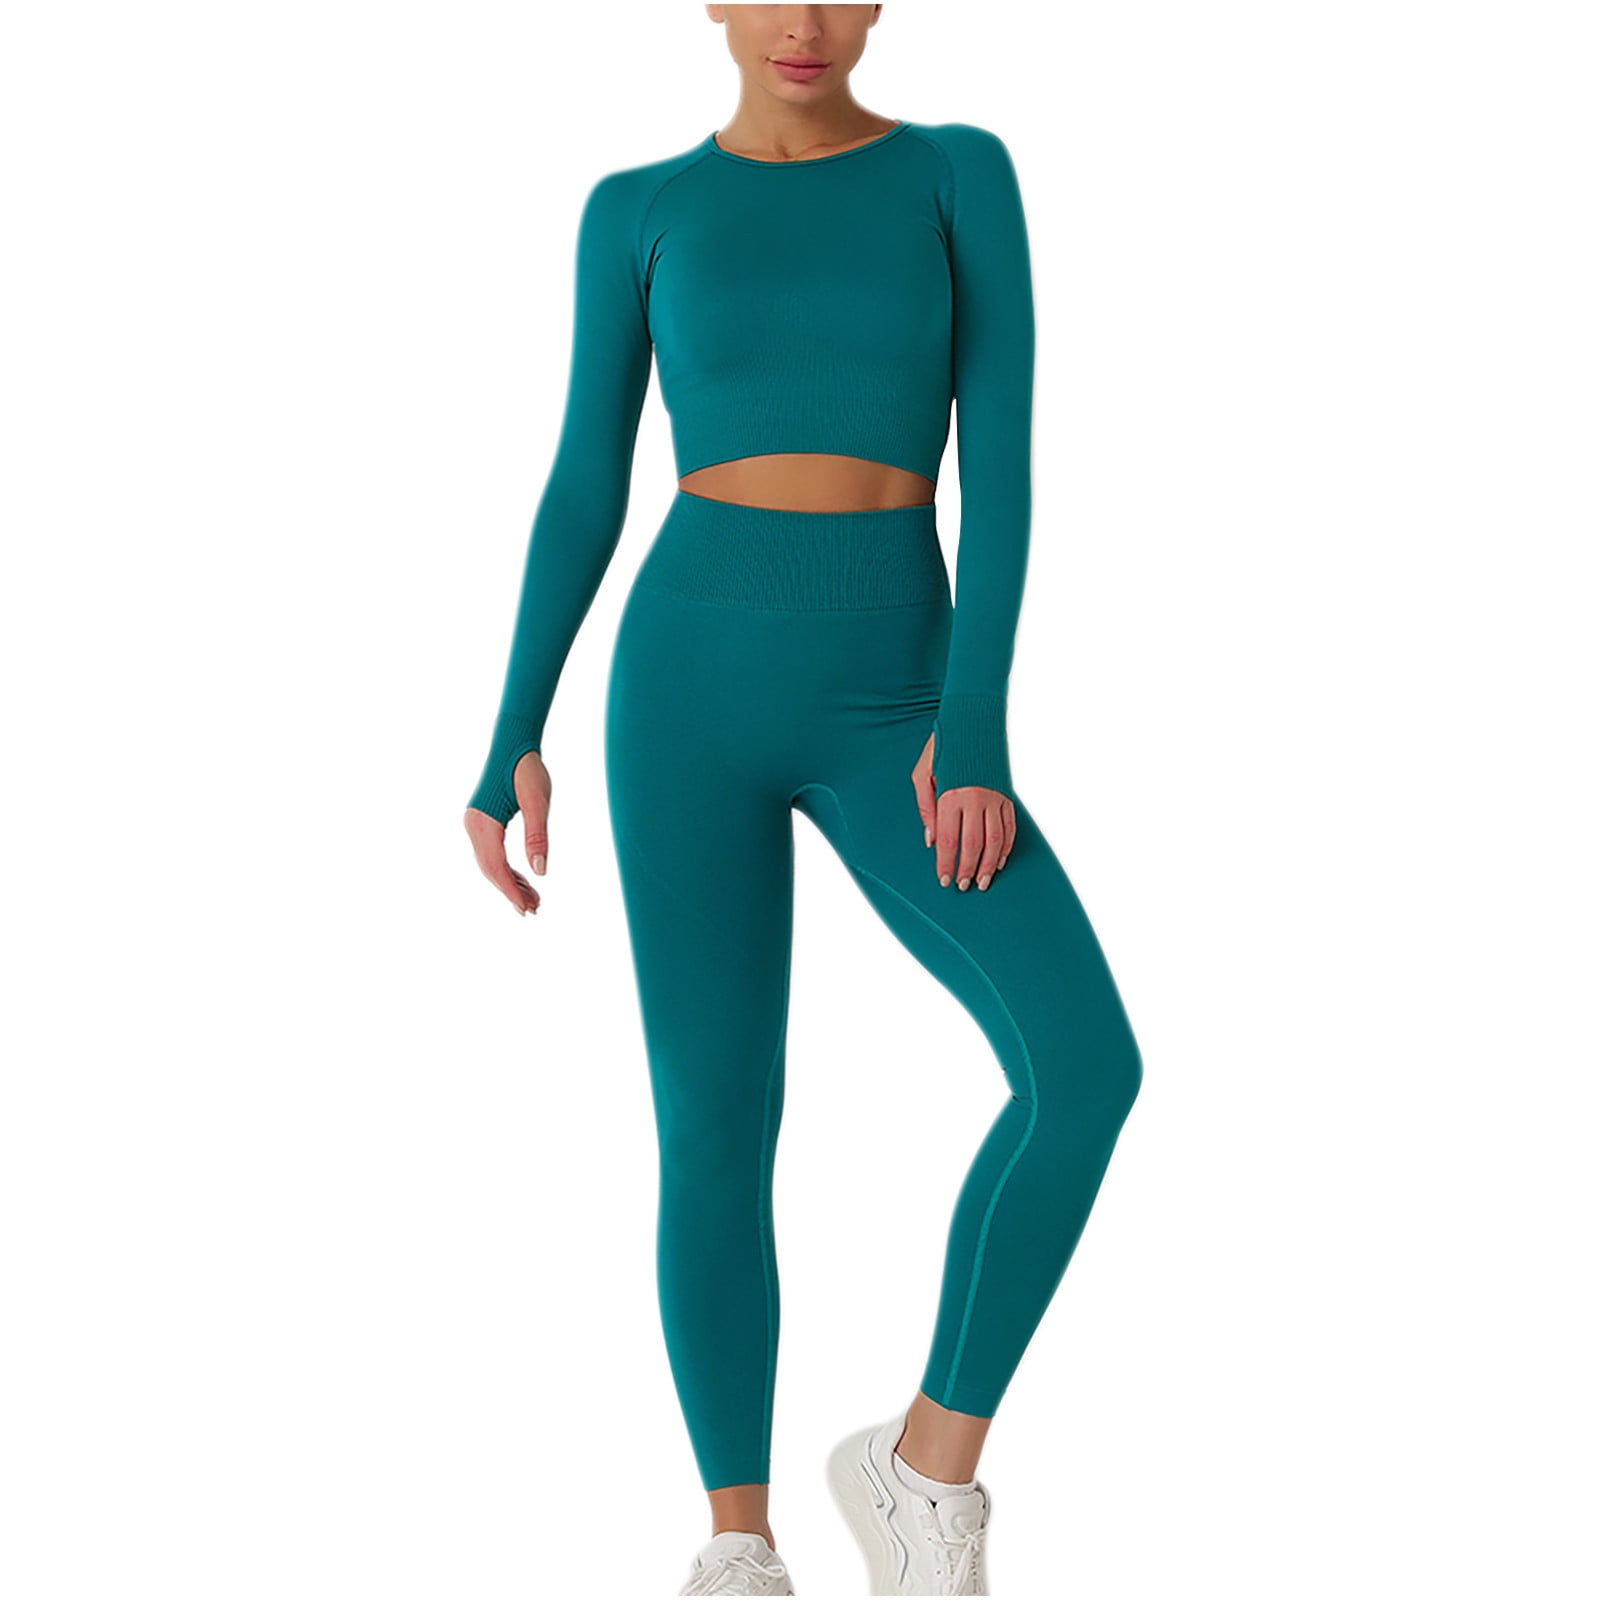 Workout Sets for Women Seamless 2 Piece Outfits Long Sleeve Sports Crop Top  Matching Leggings Yoga Gym Activewear 